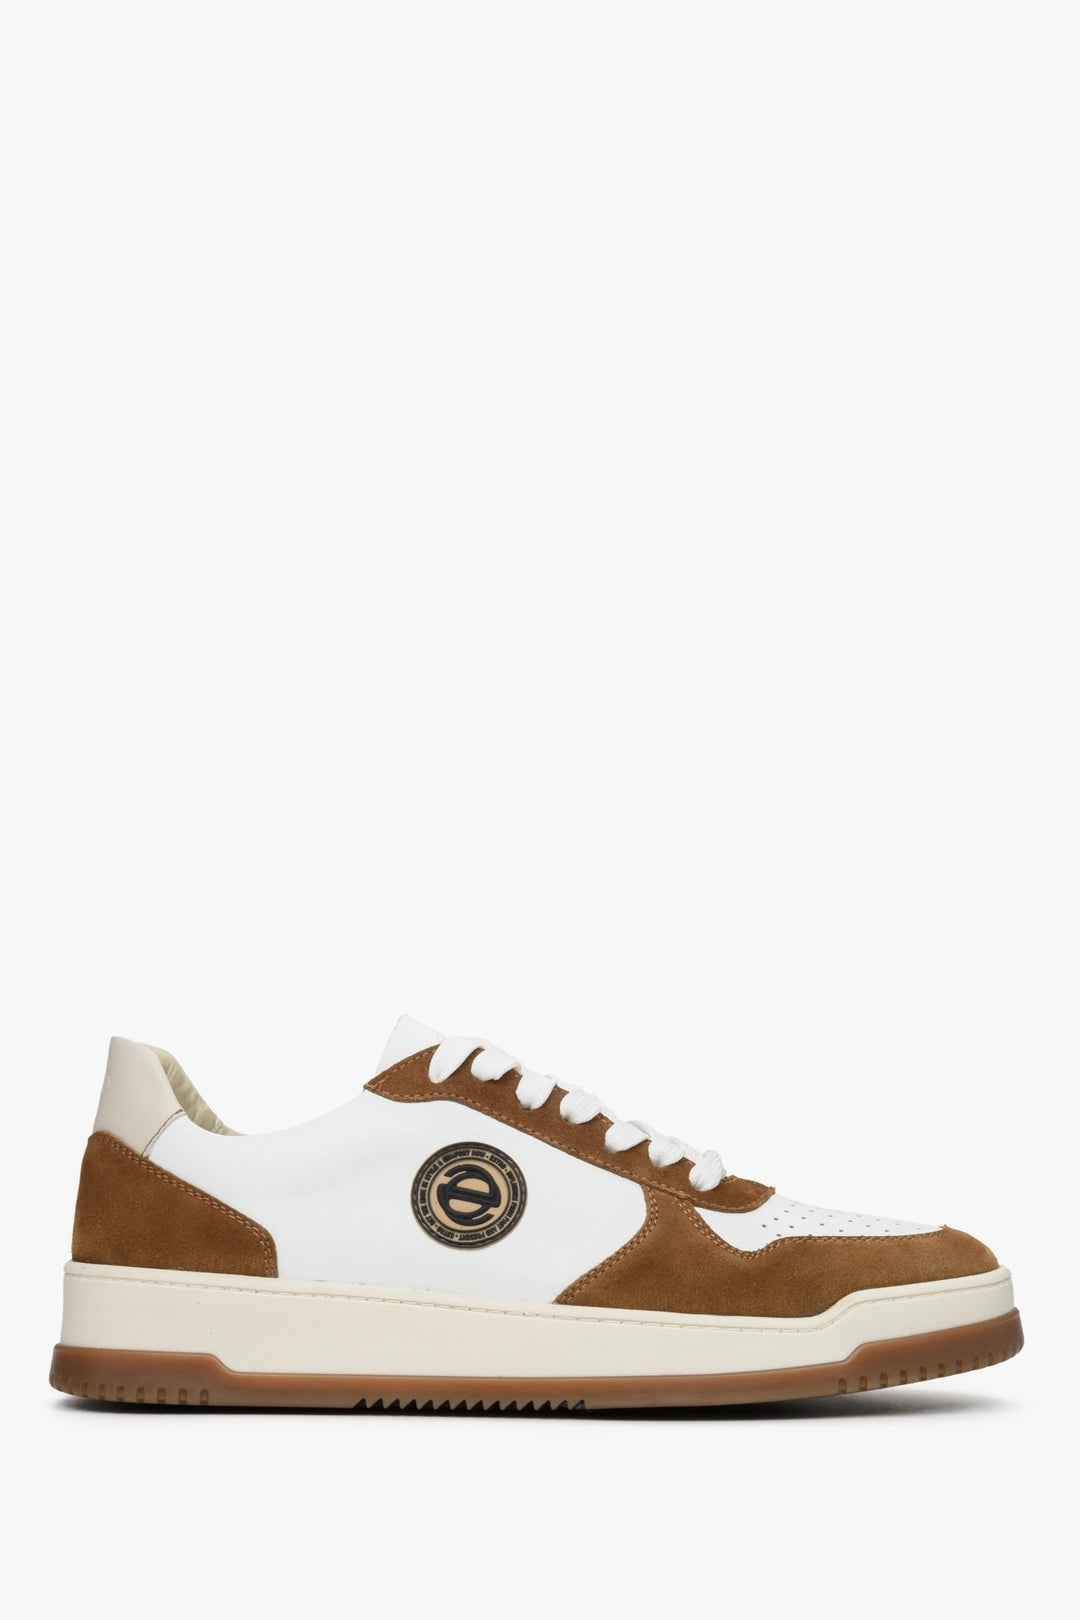 Brown & White Men's Sneakers made of Leather and Suede Estro ER00113017